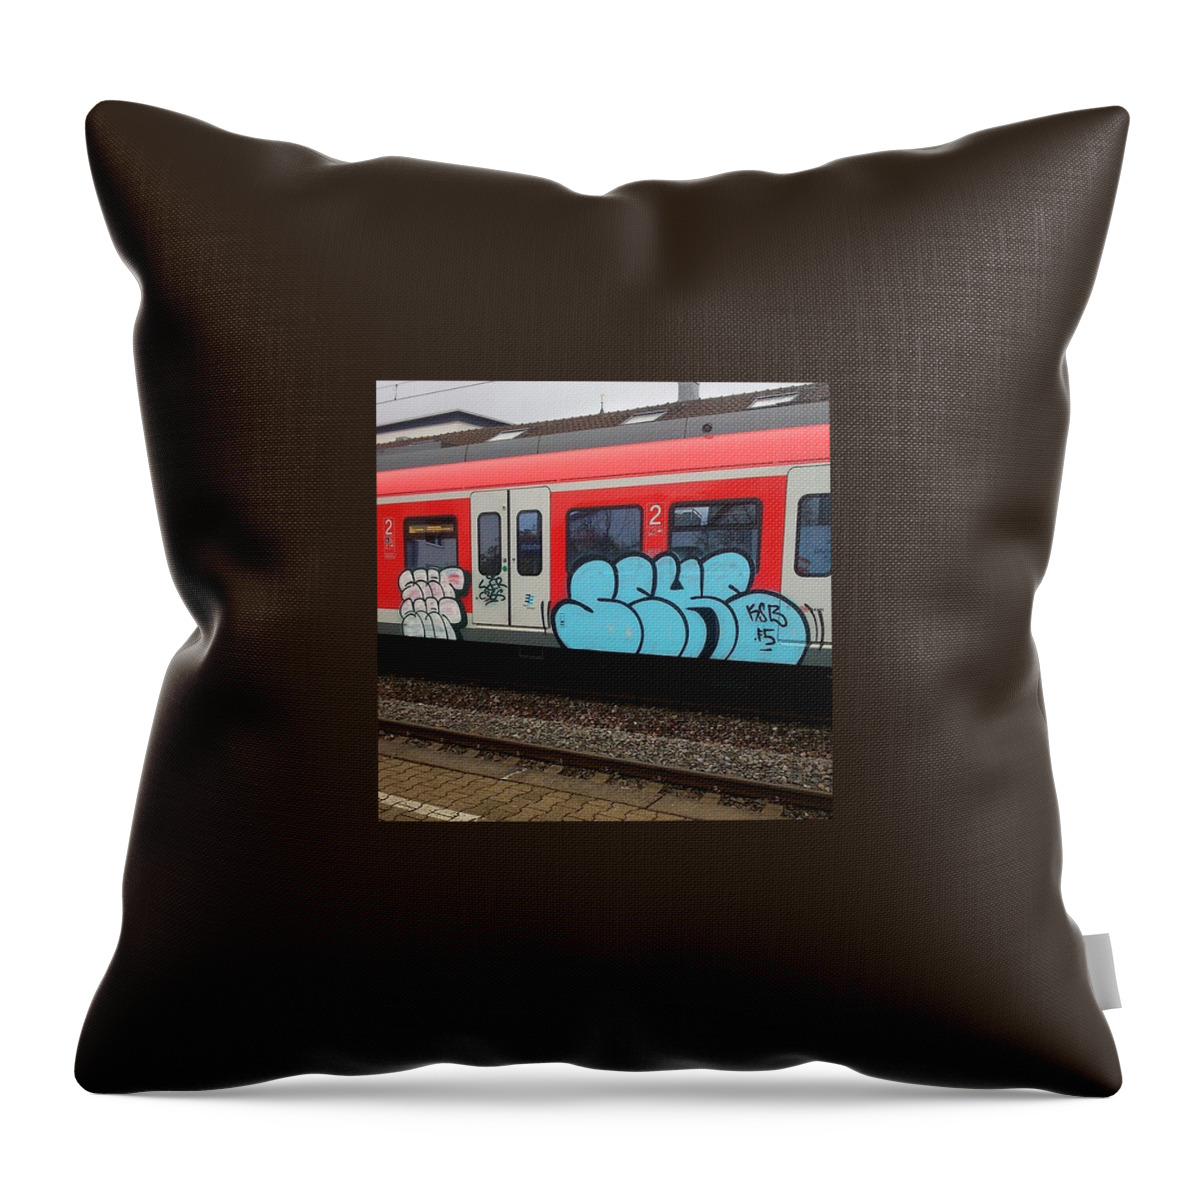 Styles Throw Pillow featuring the photograph Instagram Photo by Nullsiebenelf Graffiti